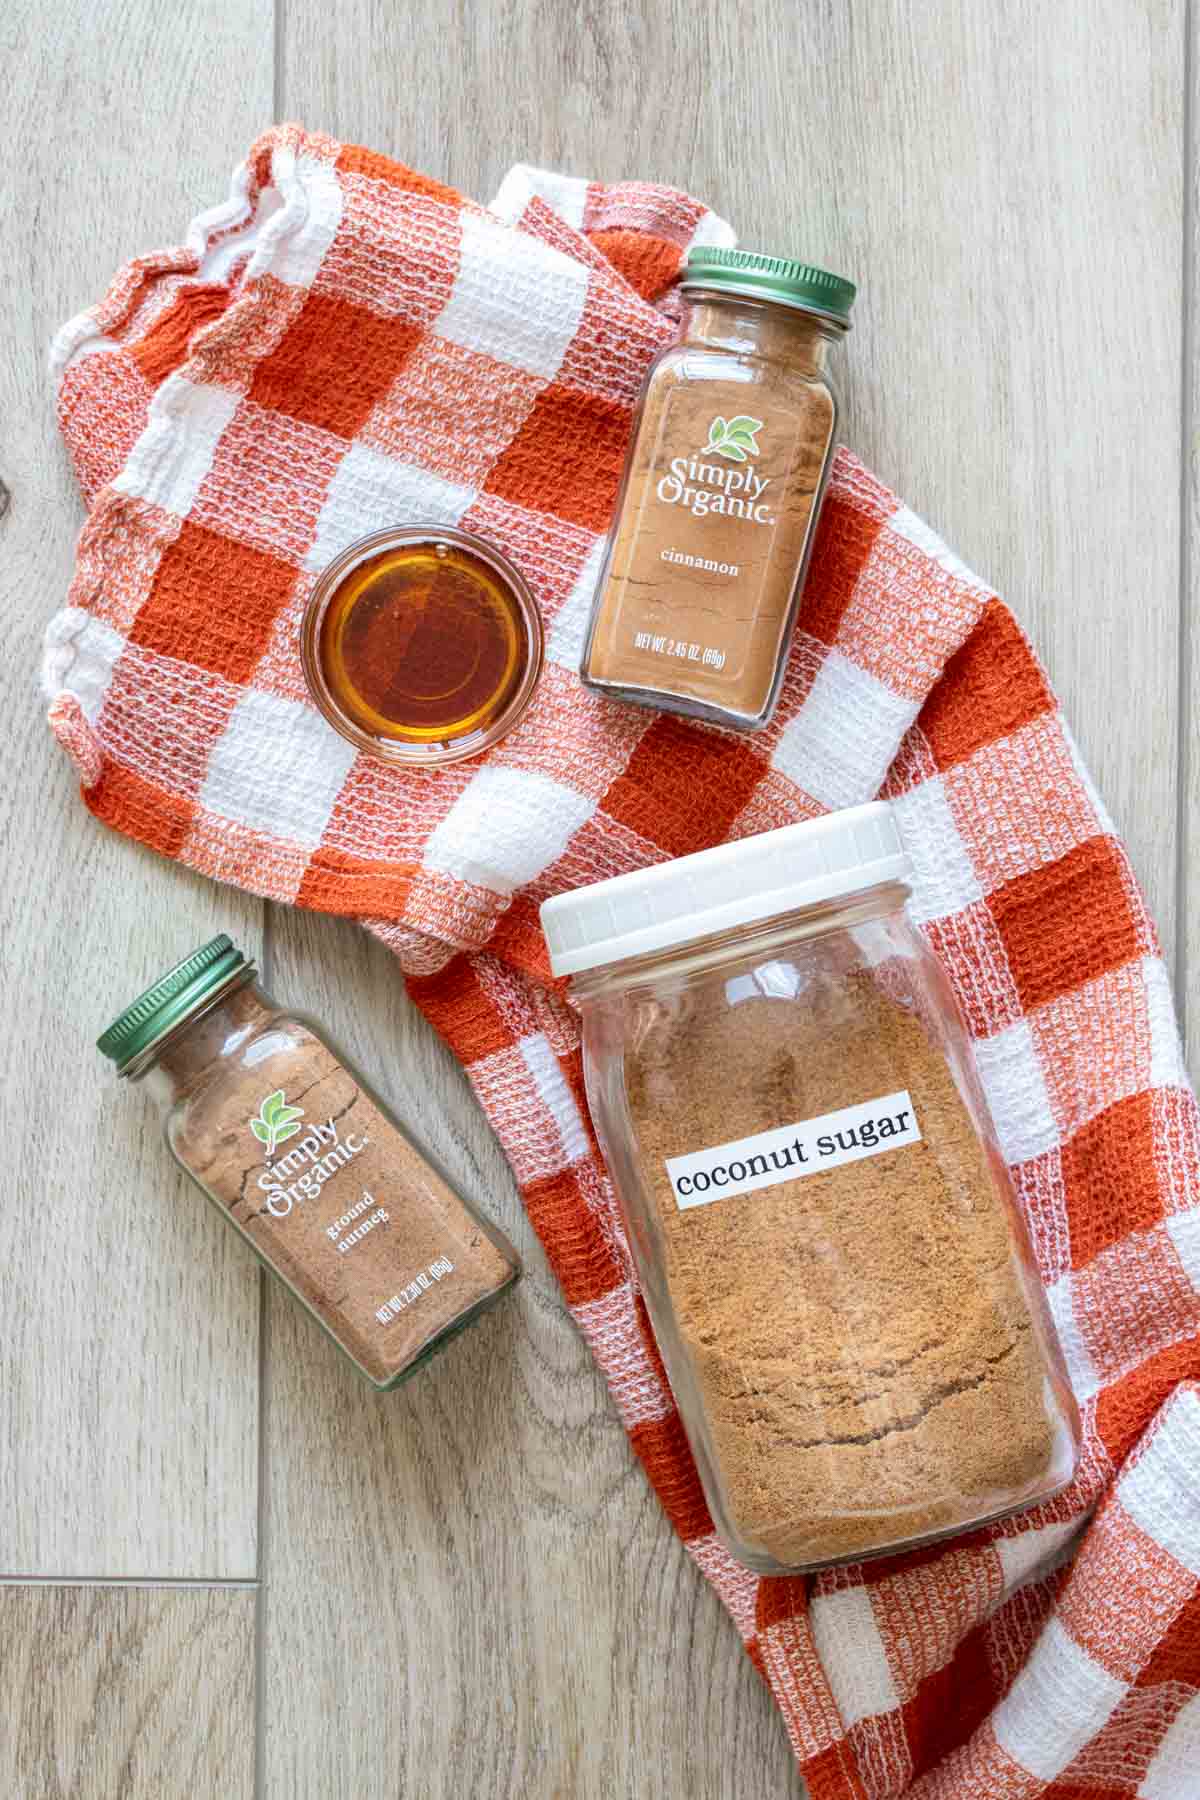 Brown sugar, maple syrup and spices on an orange and white checked towel.